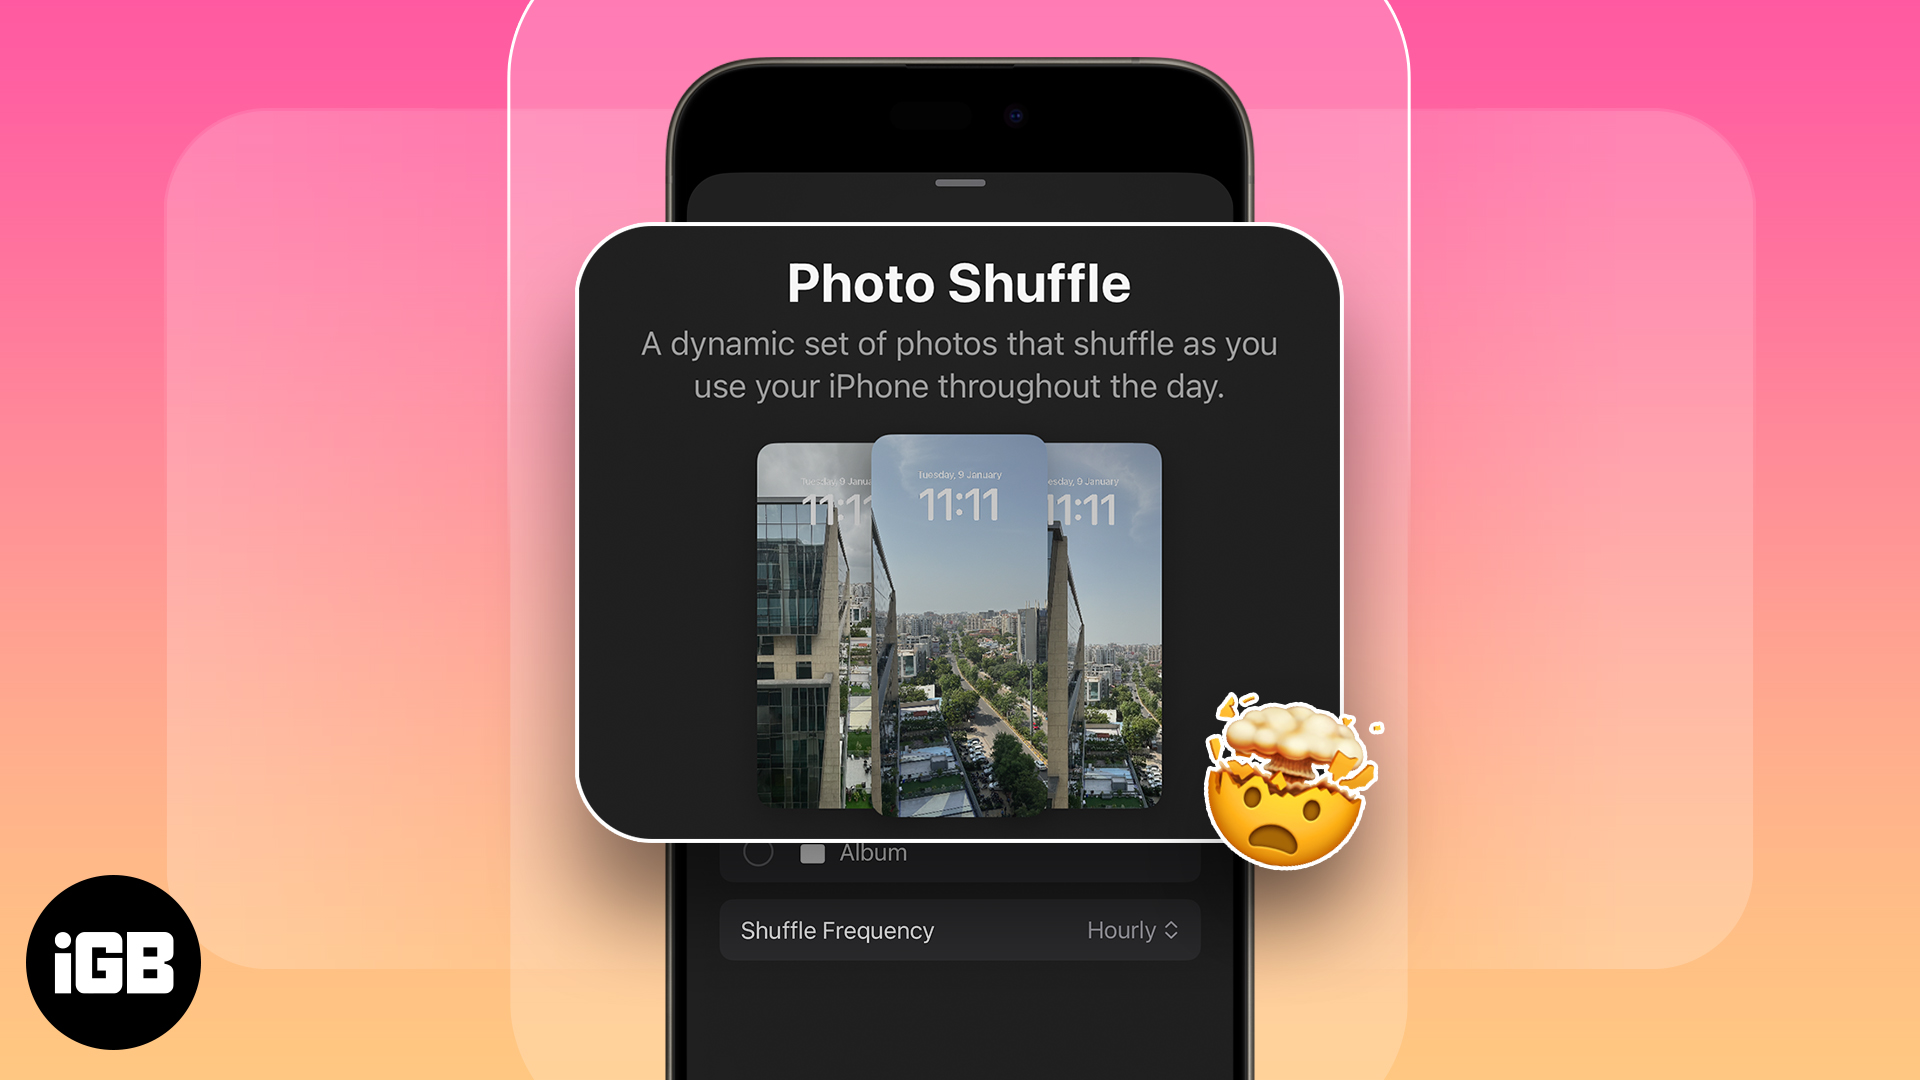 How to use Photo Shuffle on iPhone